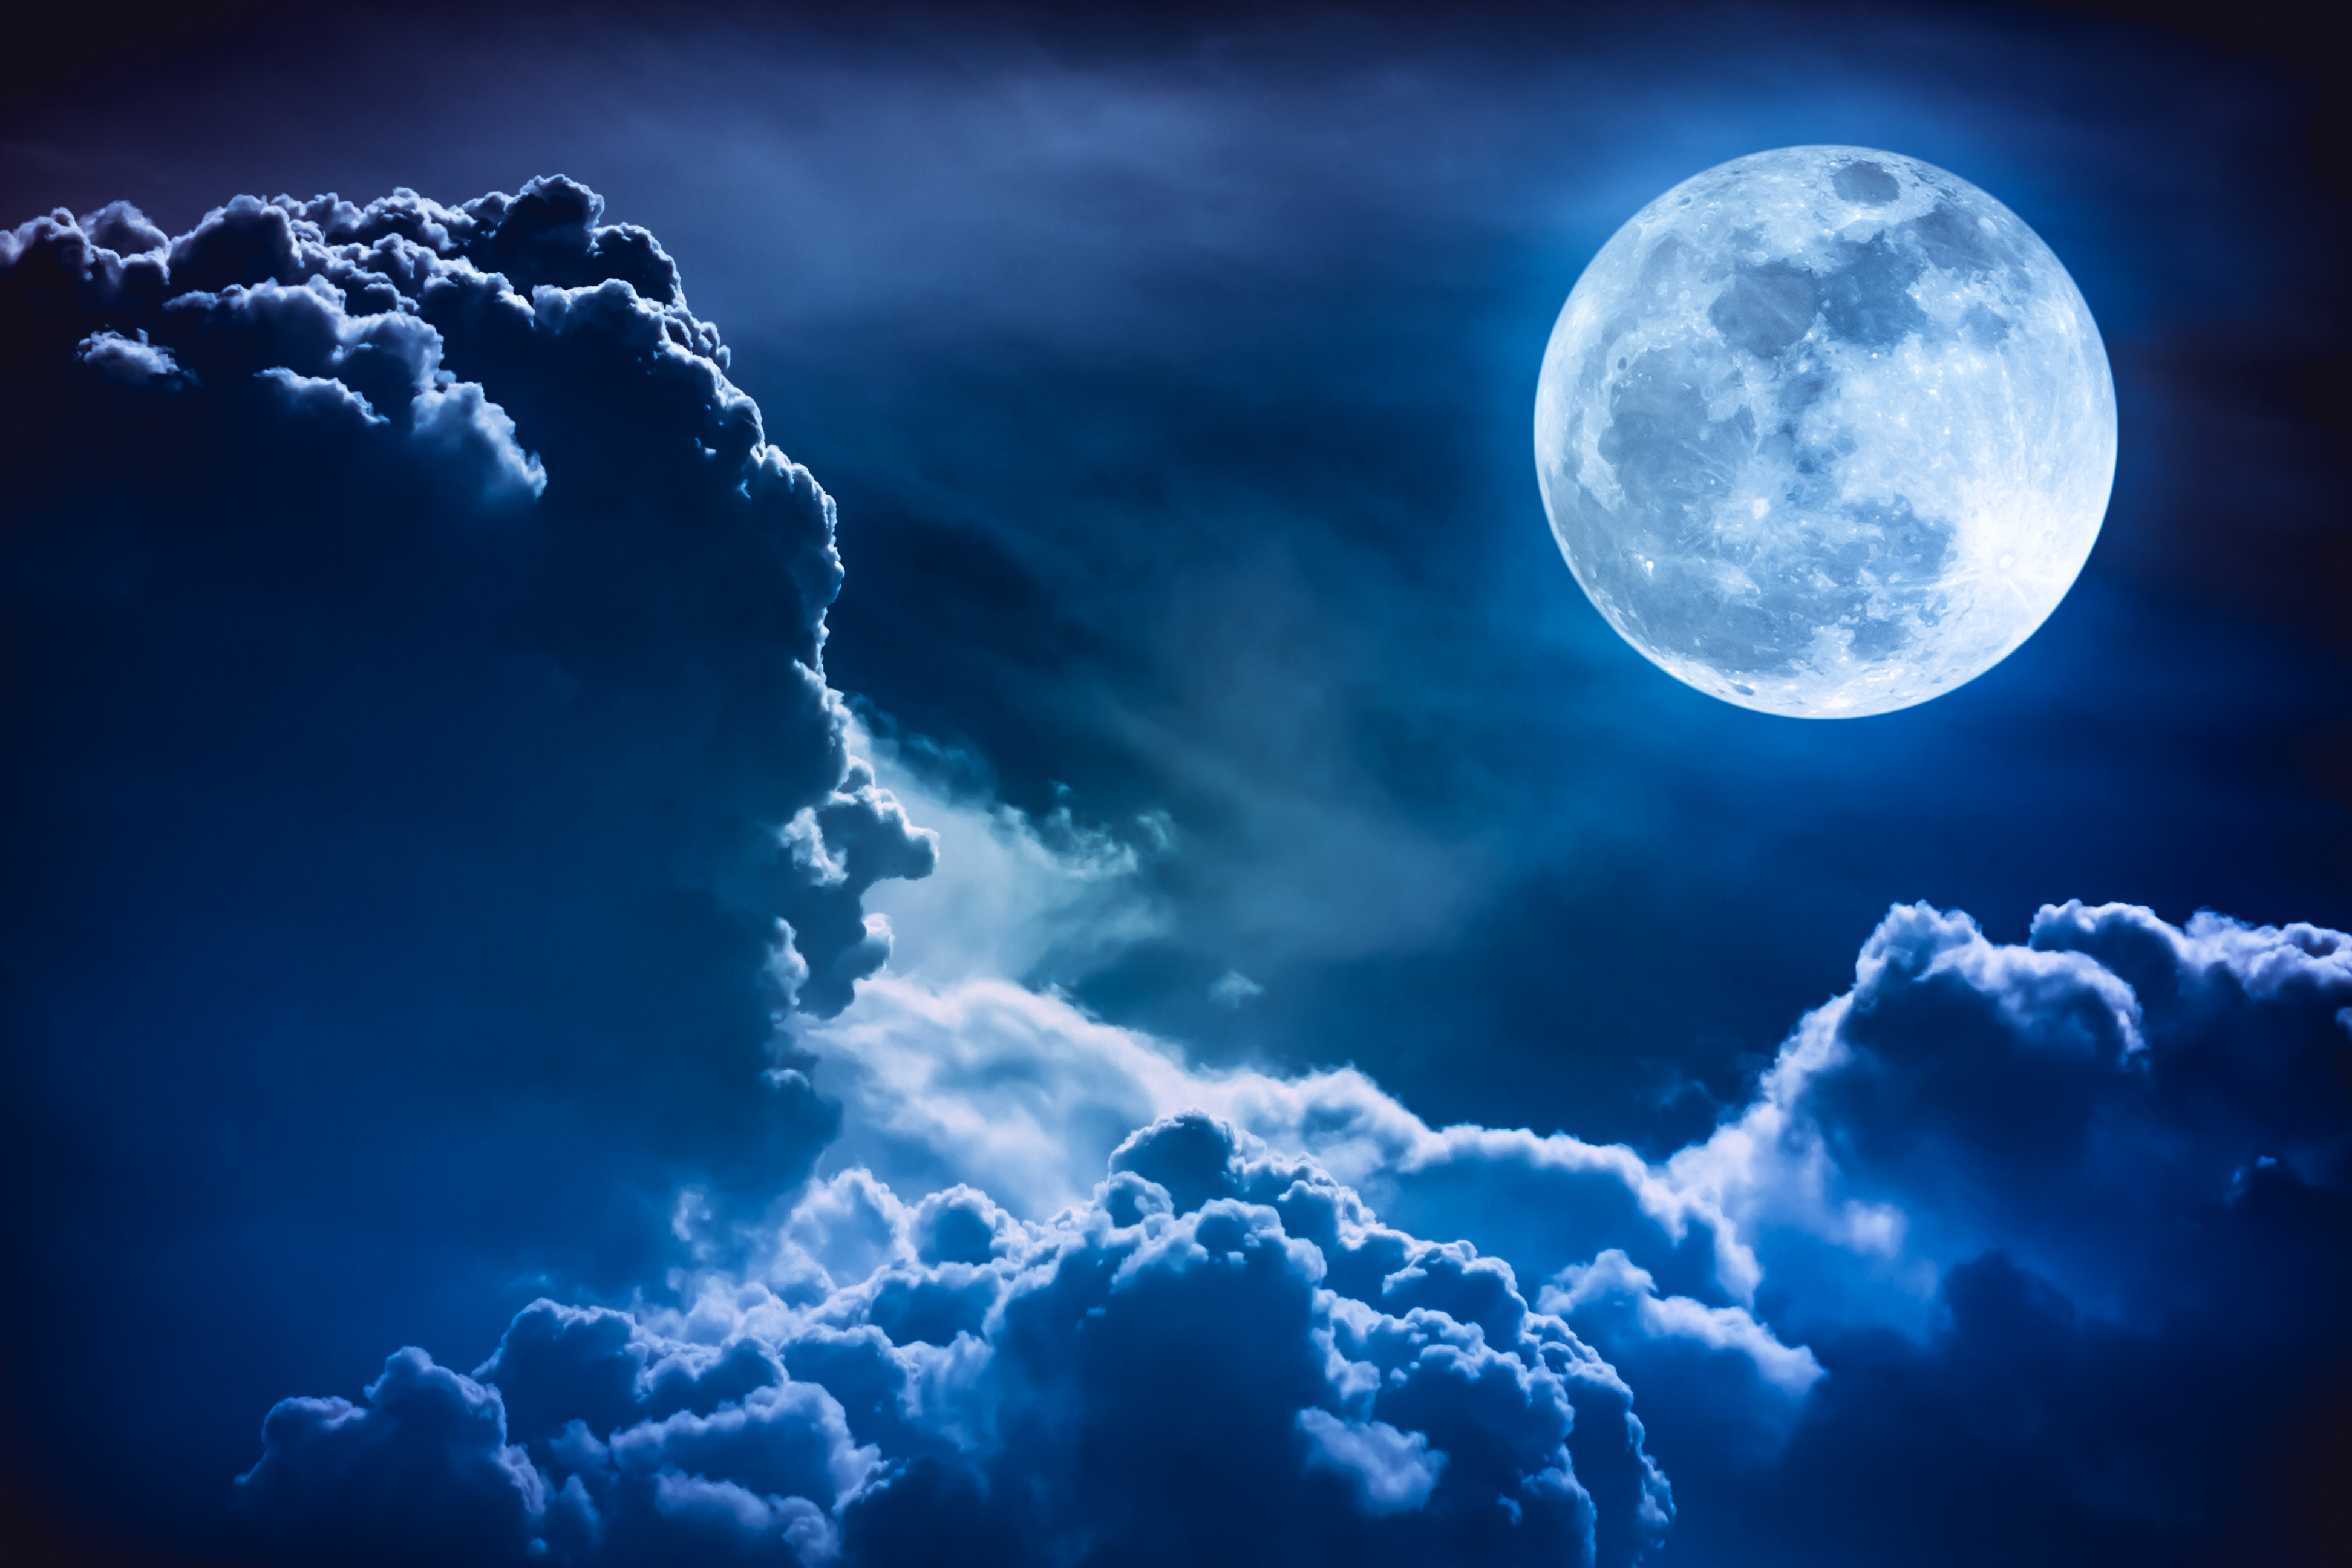 Image of a full moon in a night sky with clouds